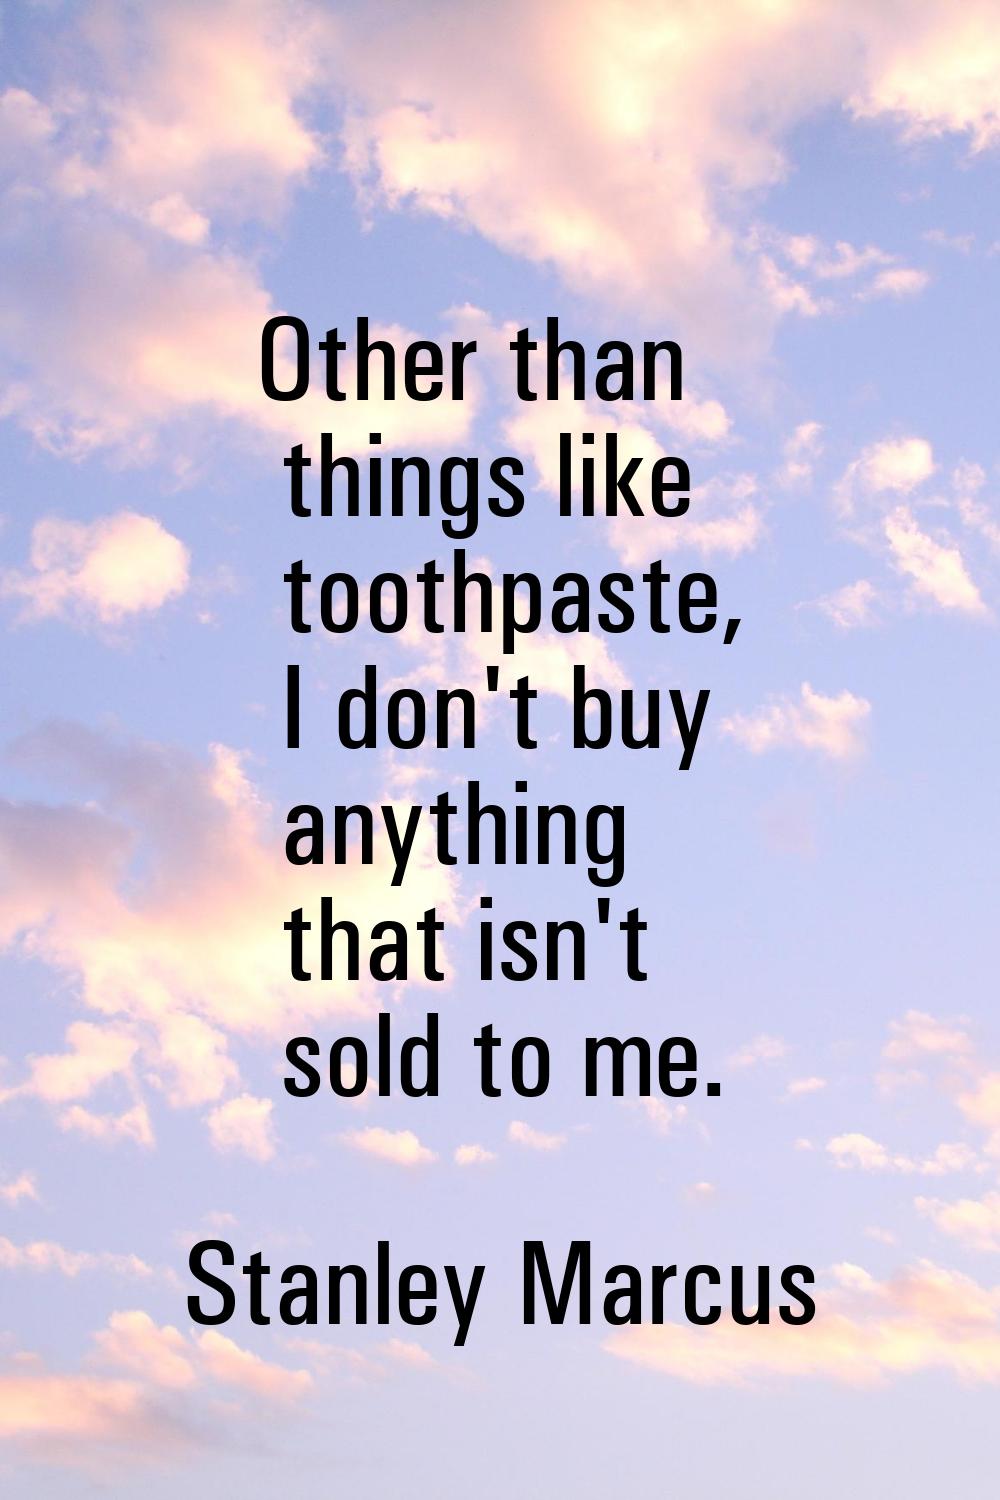 Other than things like toothpaste, I don't buy anything that isn't sold to me.